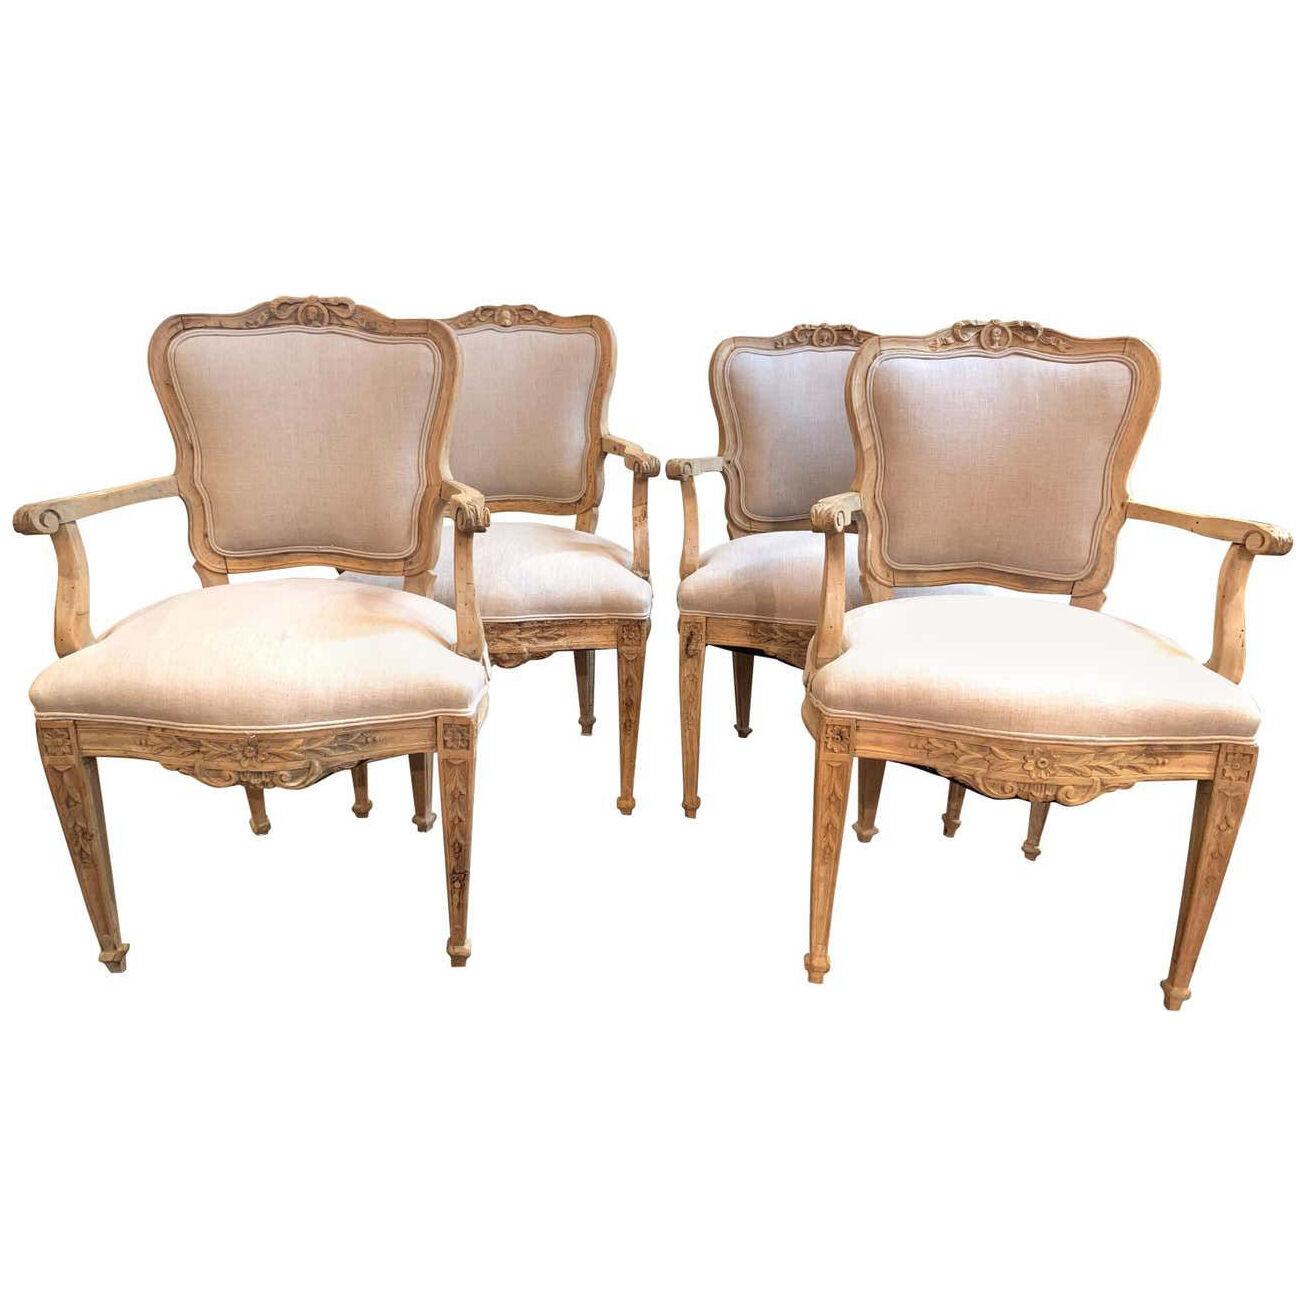 Set of 4 18th Century French Armchairs Made of Bleached Walnut